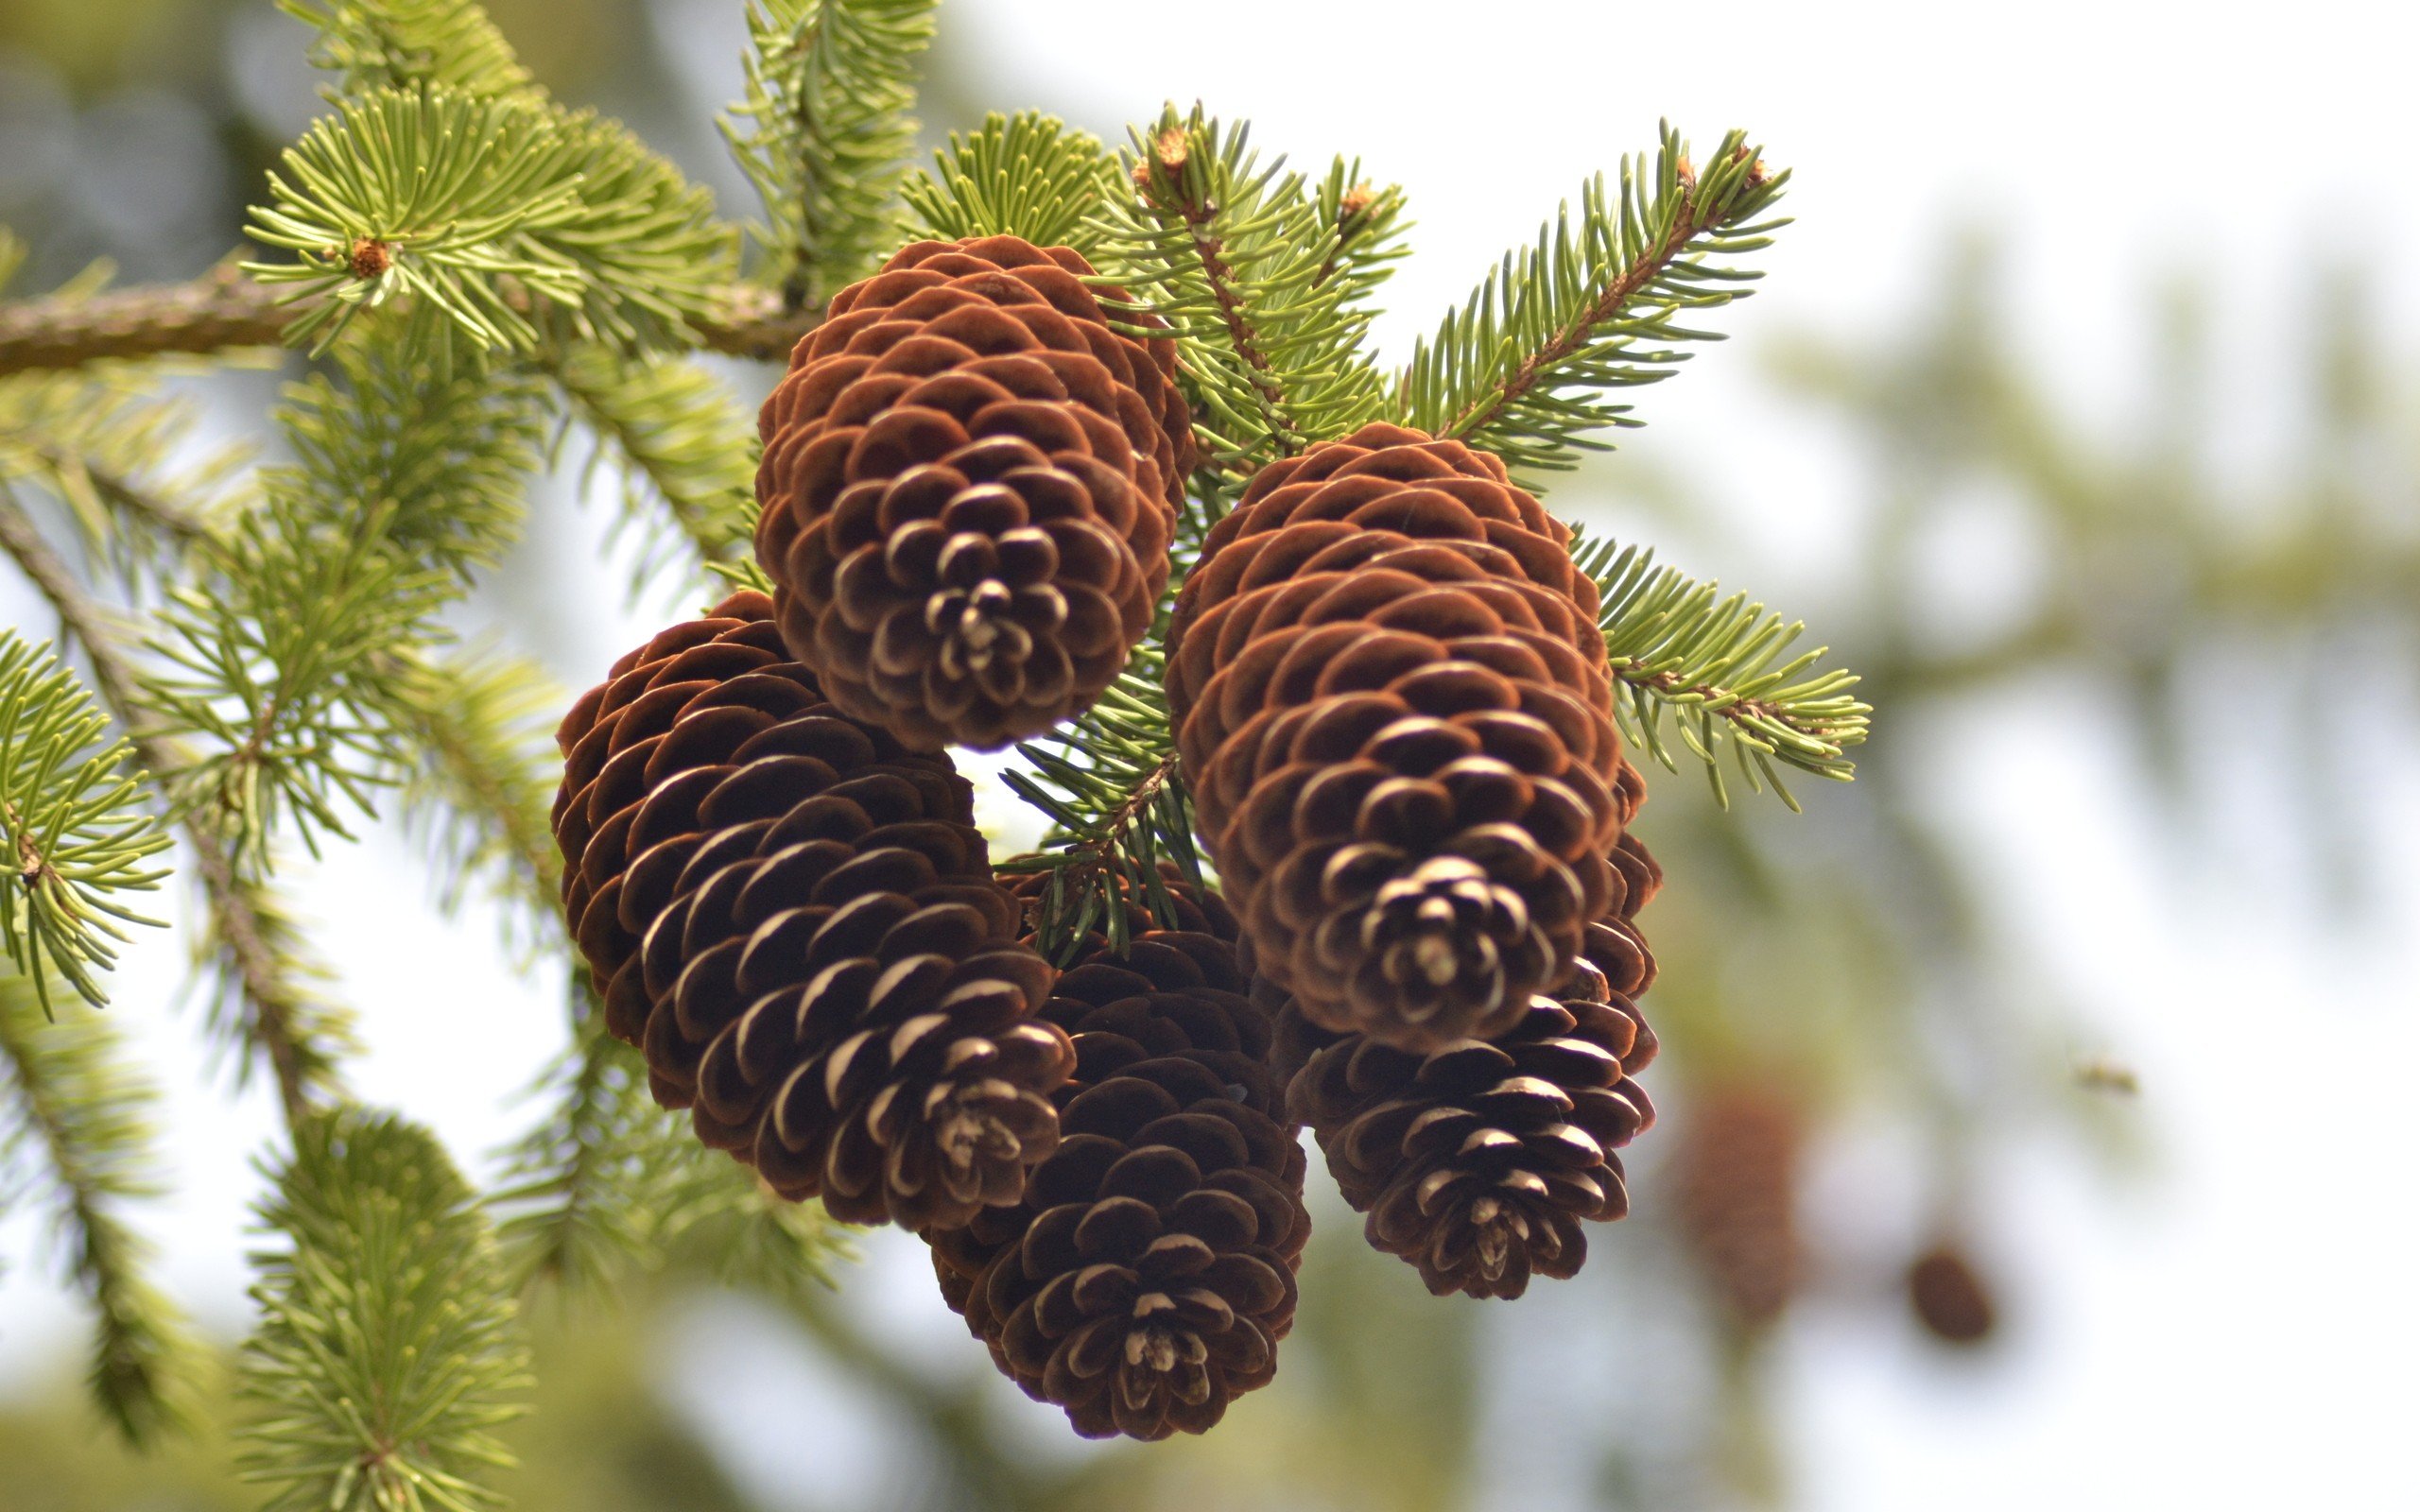 rate select rating give pine cones 1 5 give pine cones 2